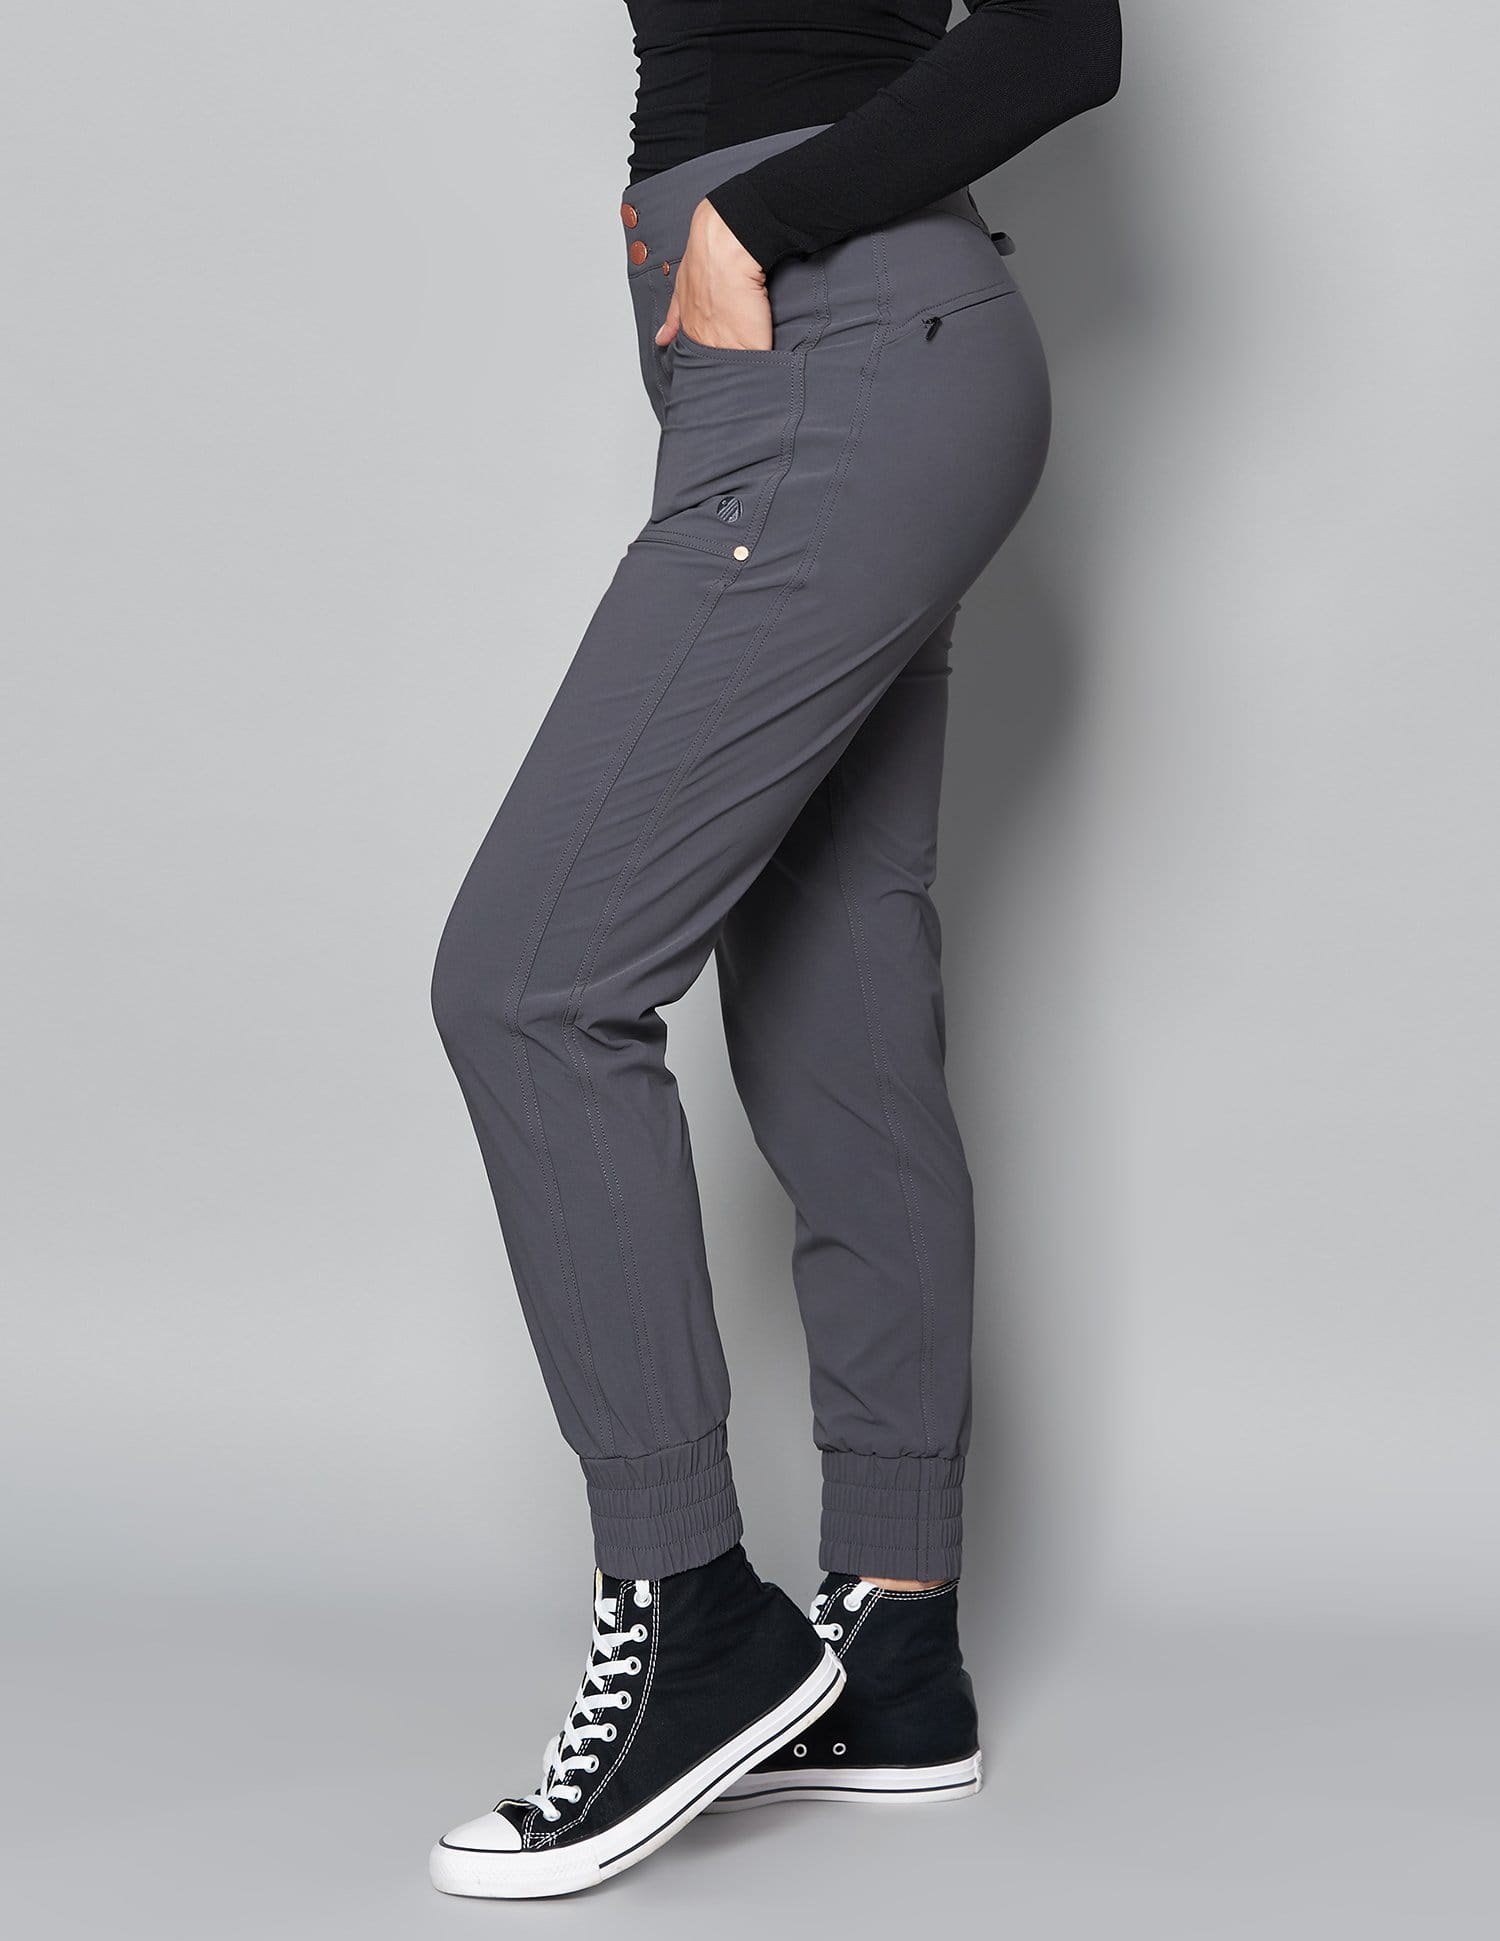 ACAI Outdoorwear - 📣Brand new! 📣 Thermal Casual Stroll Pants. Our best  selling Casual Stroll Pants reimagined for the cooler months in our  ultra-insulating, thermal performance fabric. Super-stretchy material with  a soft